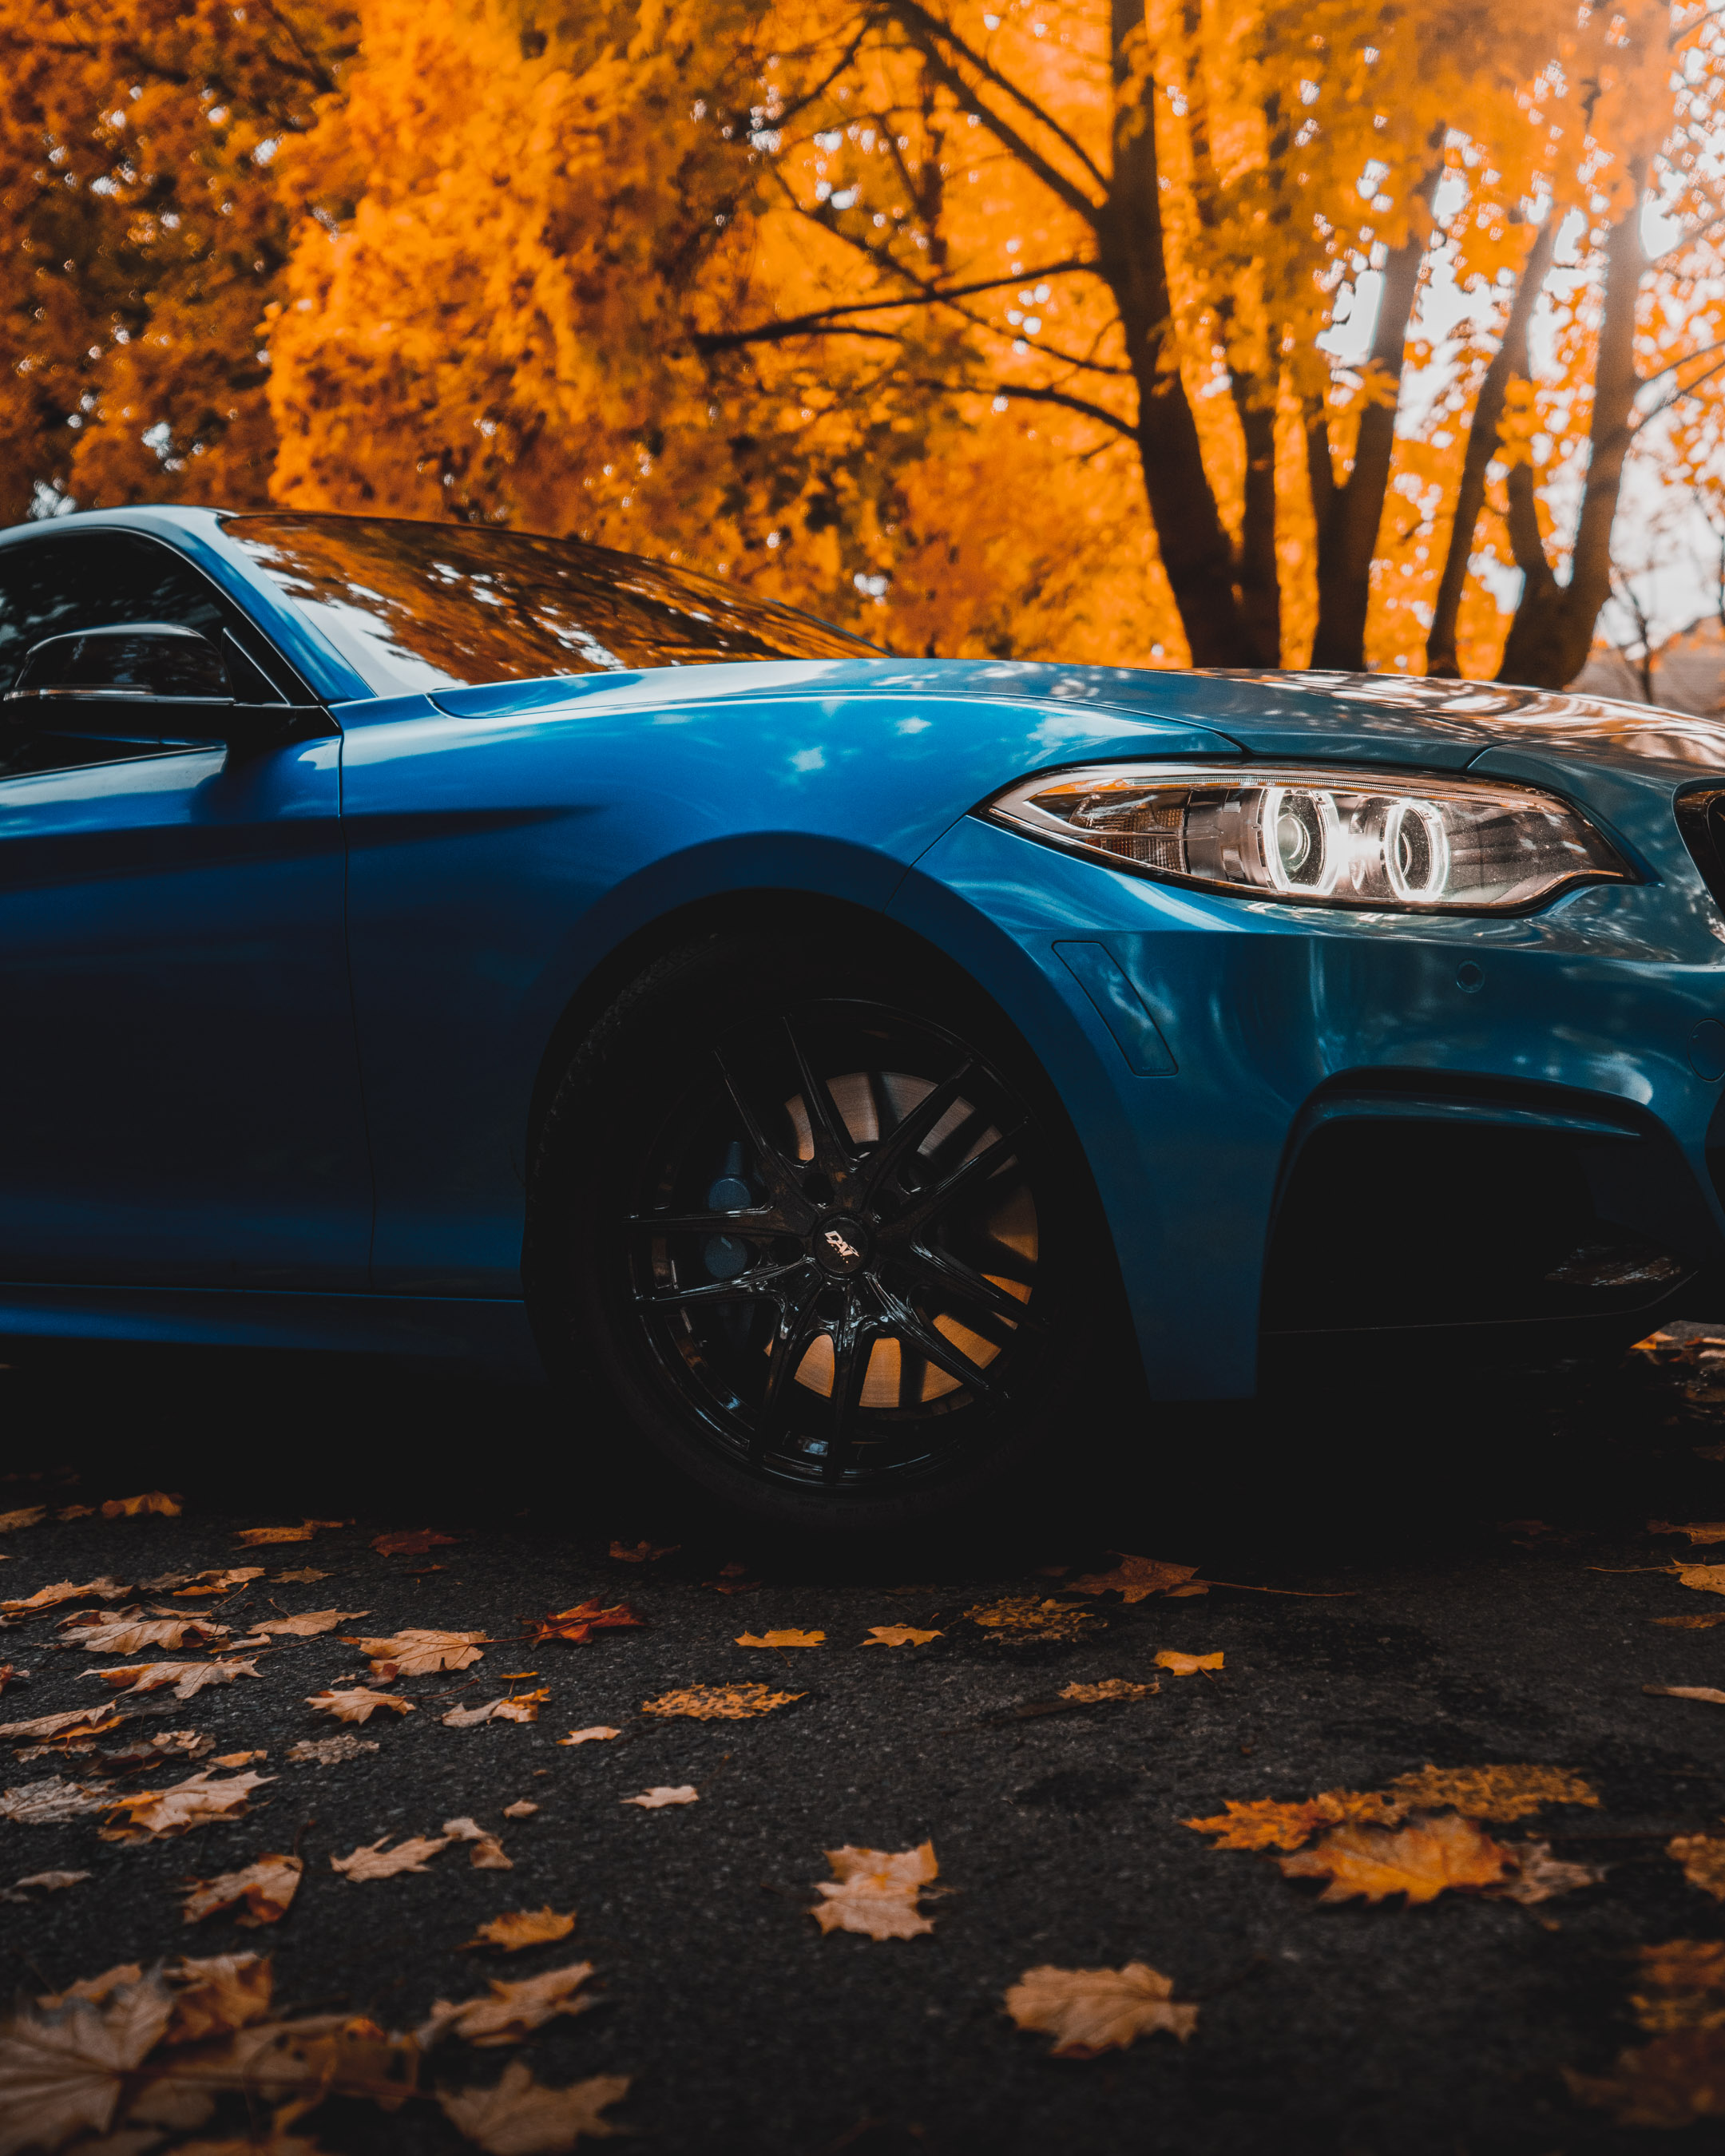 2016 Blue BMW 2 series upclose side view with the backdrop of Fall leaves